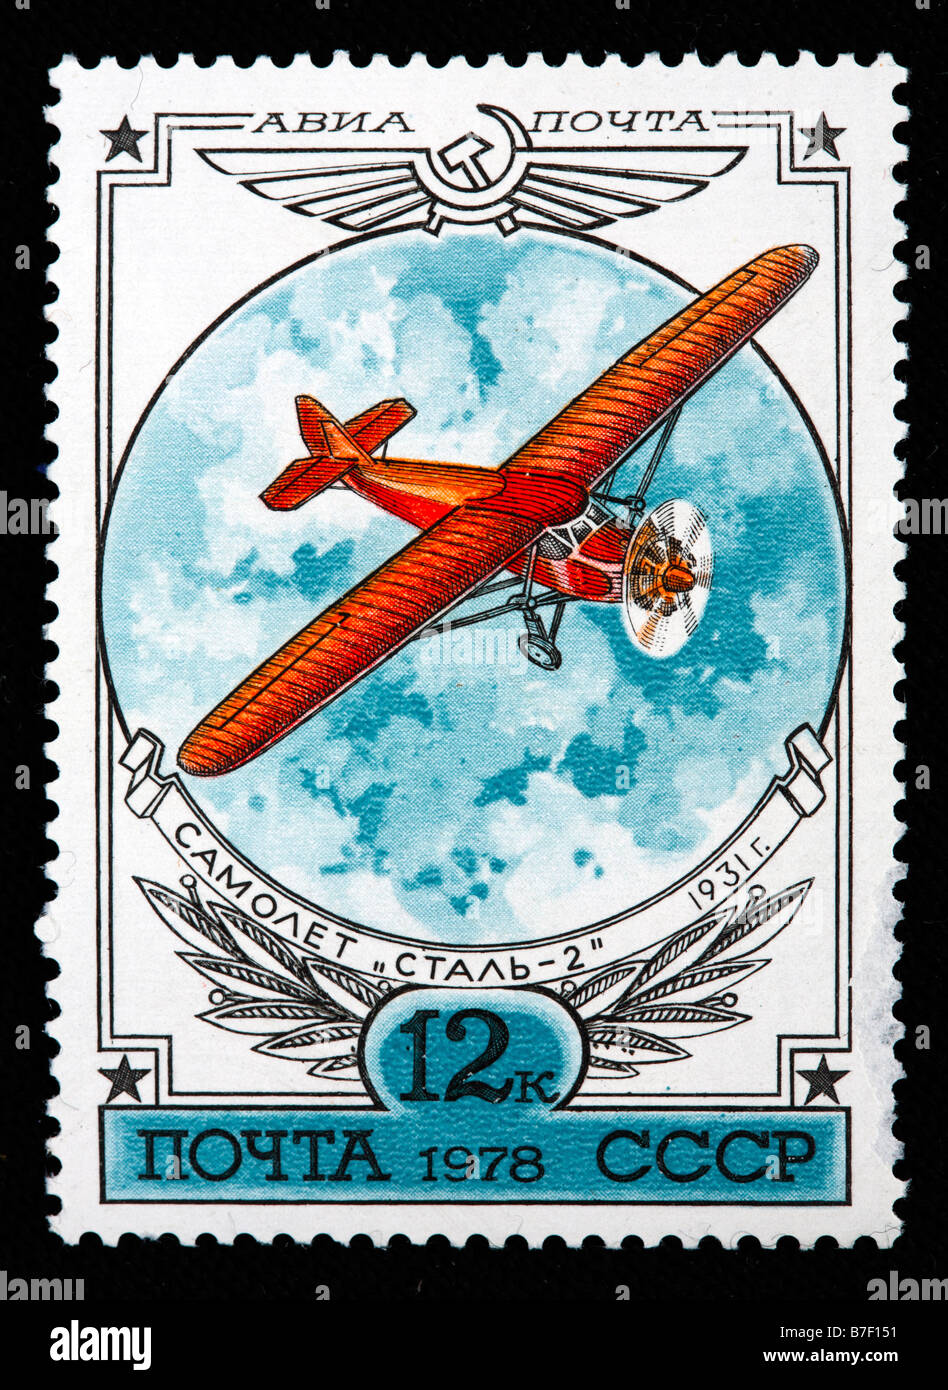 History of aviation, Russian plane 'Stal 2' (1931), postage stamp, USSR, 1978 Stock Photo